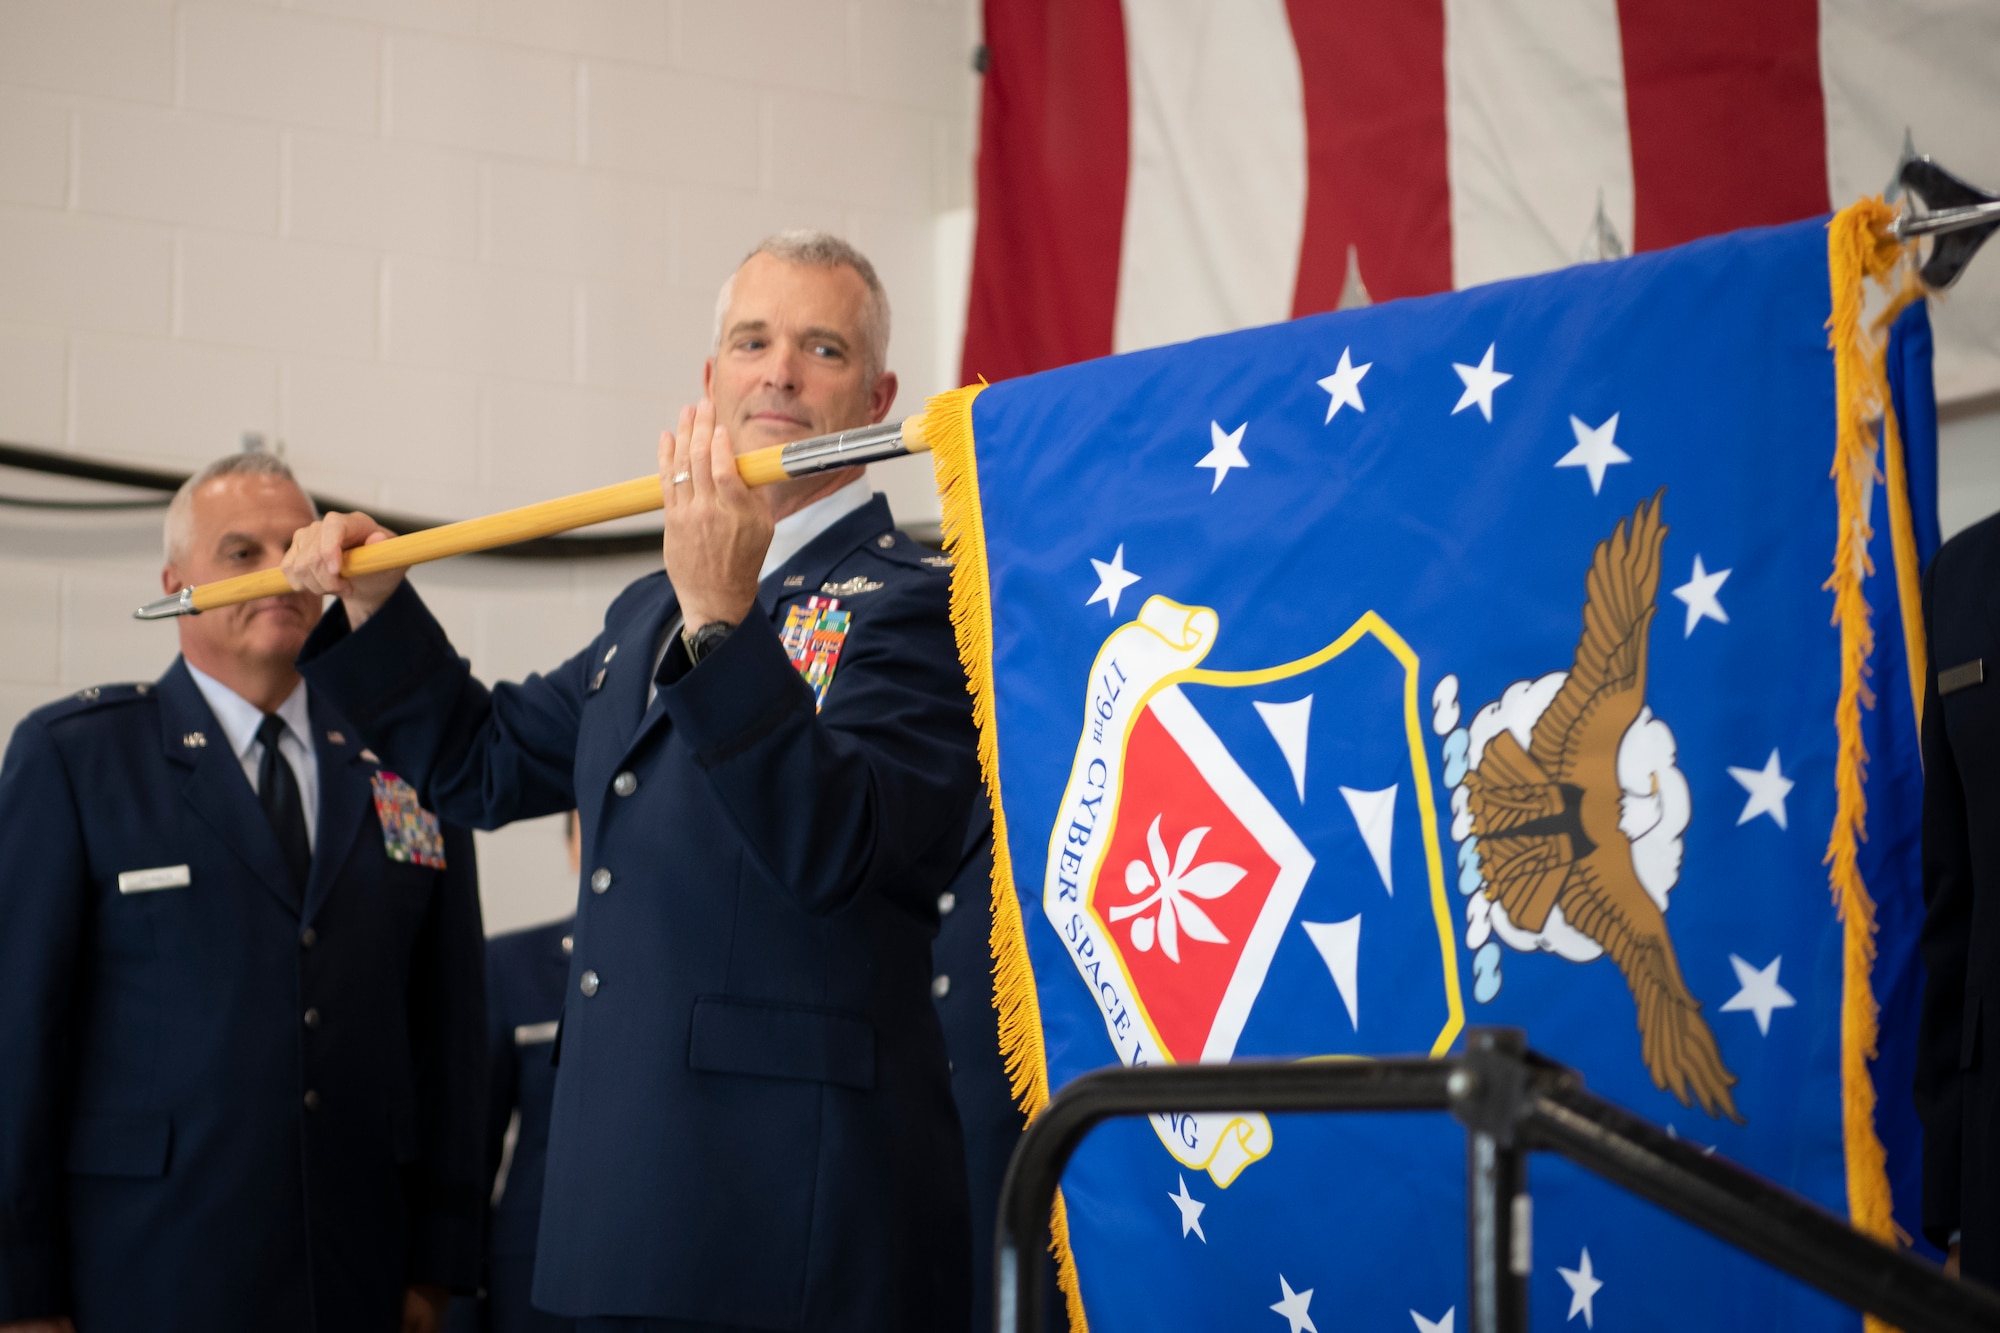 Col. Darren Hamilton, commander of The 179th Airlift Wing, an Ohio Air National Guard unit, reveals the new flag as the unit is redesignated as the 179th Cyberspace Wing